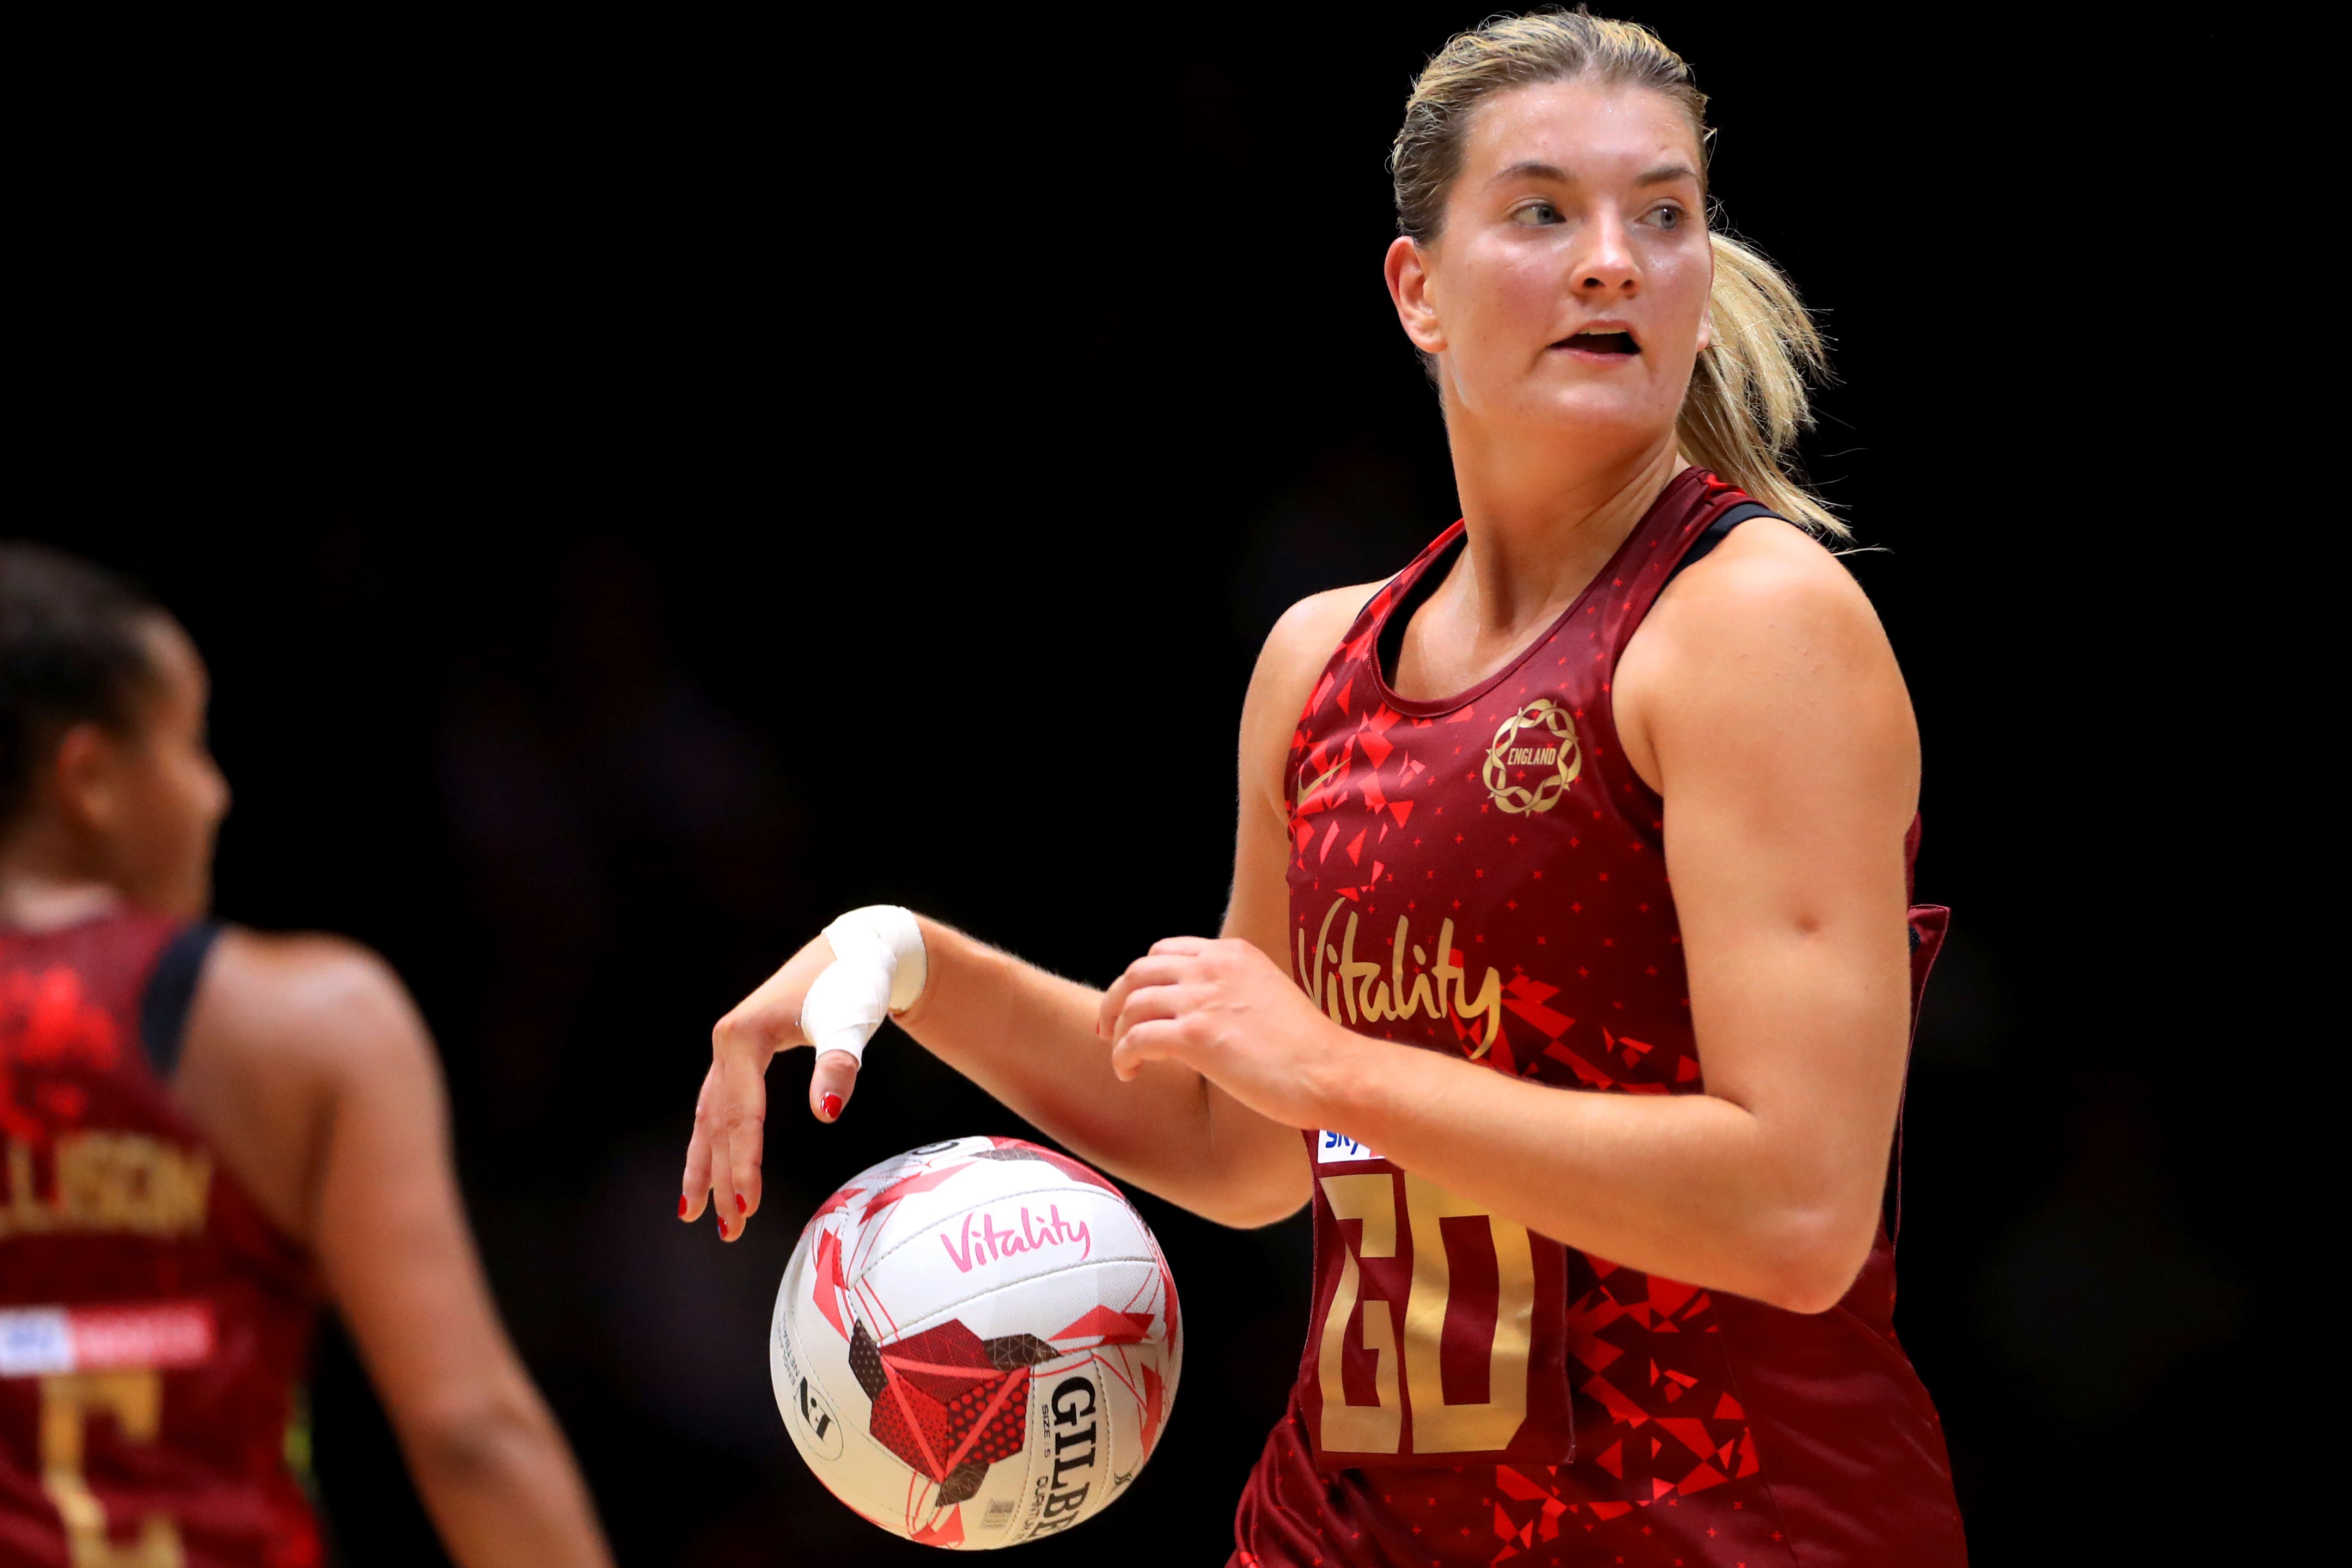 We all face the same issues: Fran Williams welcomes NETBALLHer